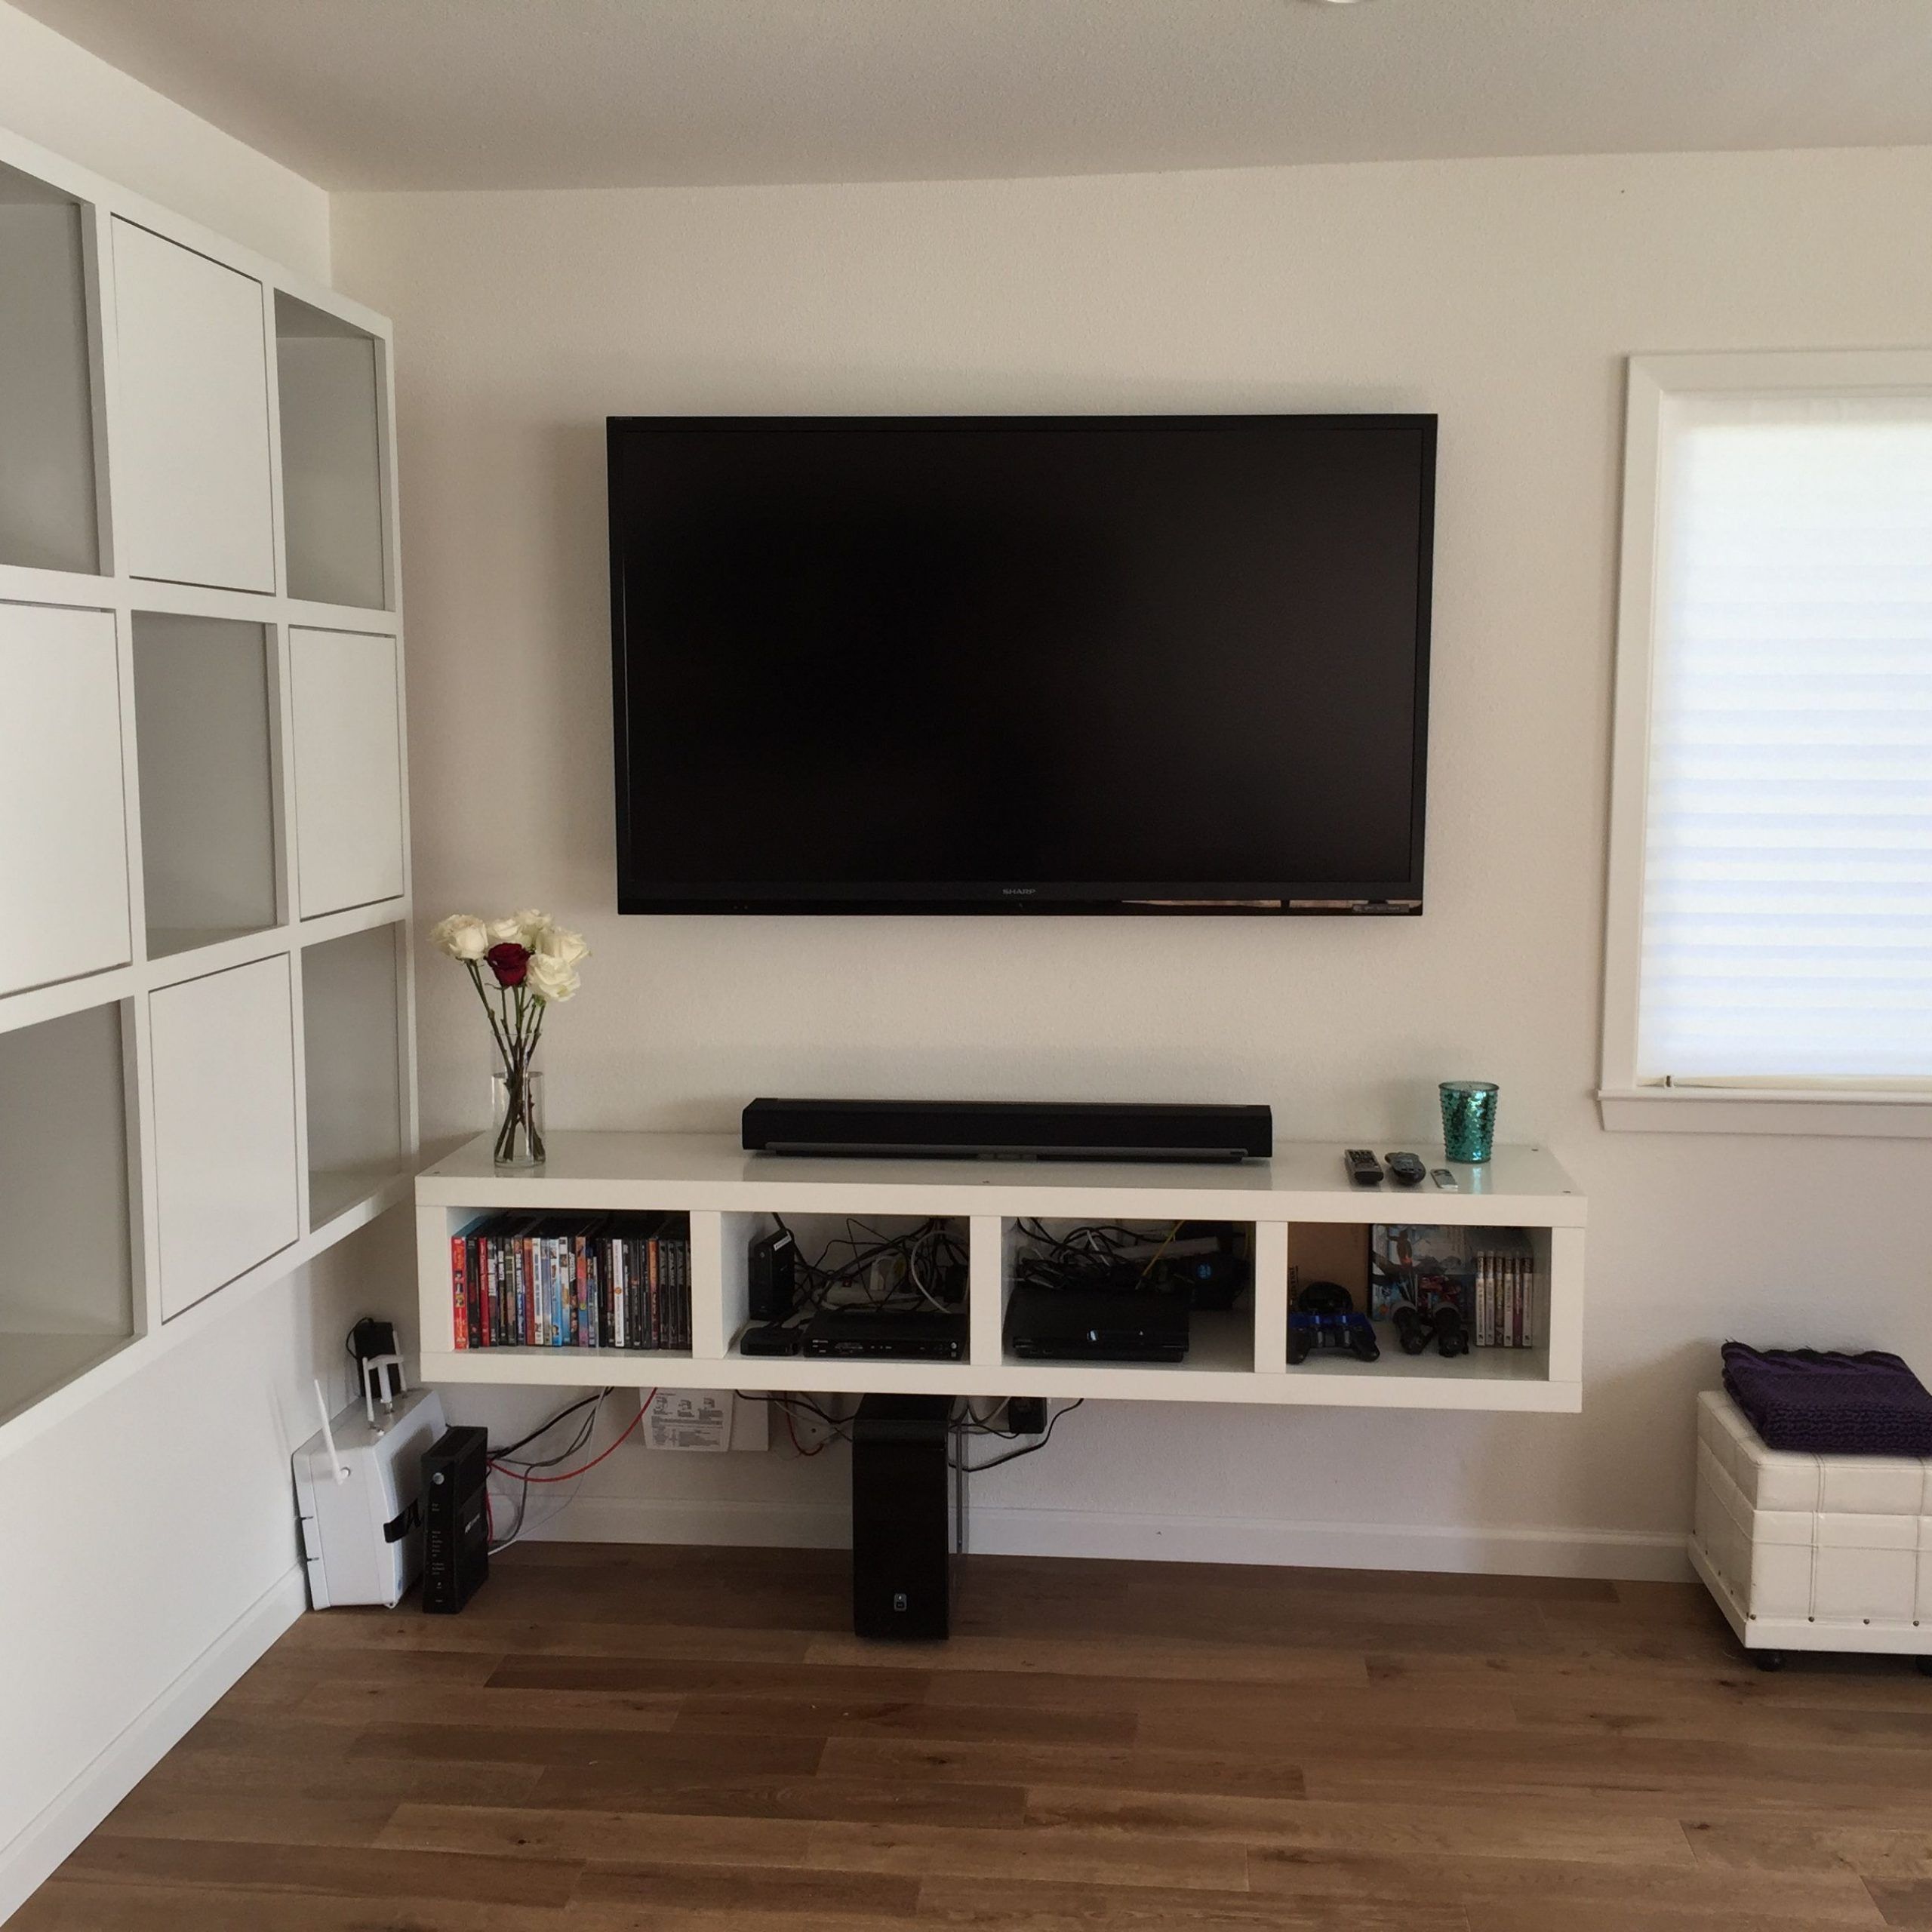 Ikea Bookshelf Converted To Floating Tv Stand – Expedit Within Wall Mounted Tv Cabinet Ikea (View 10 of 15)